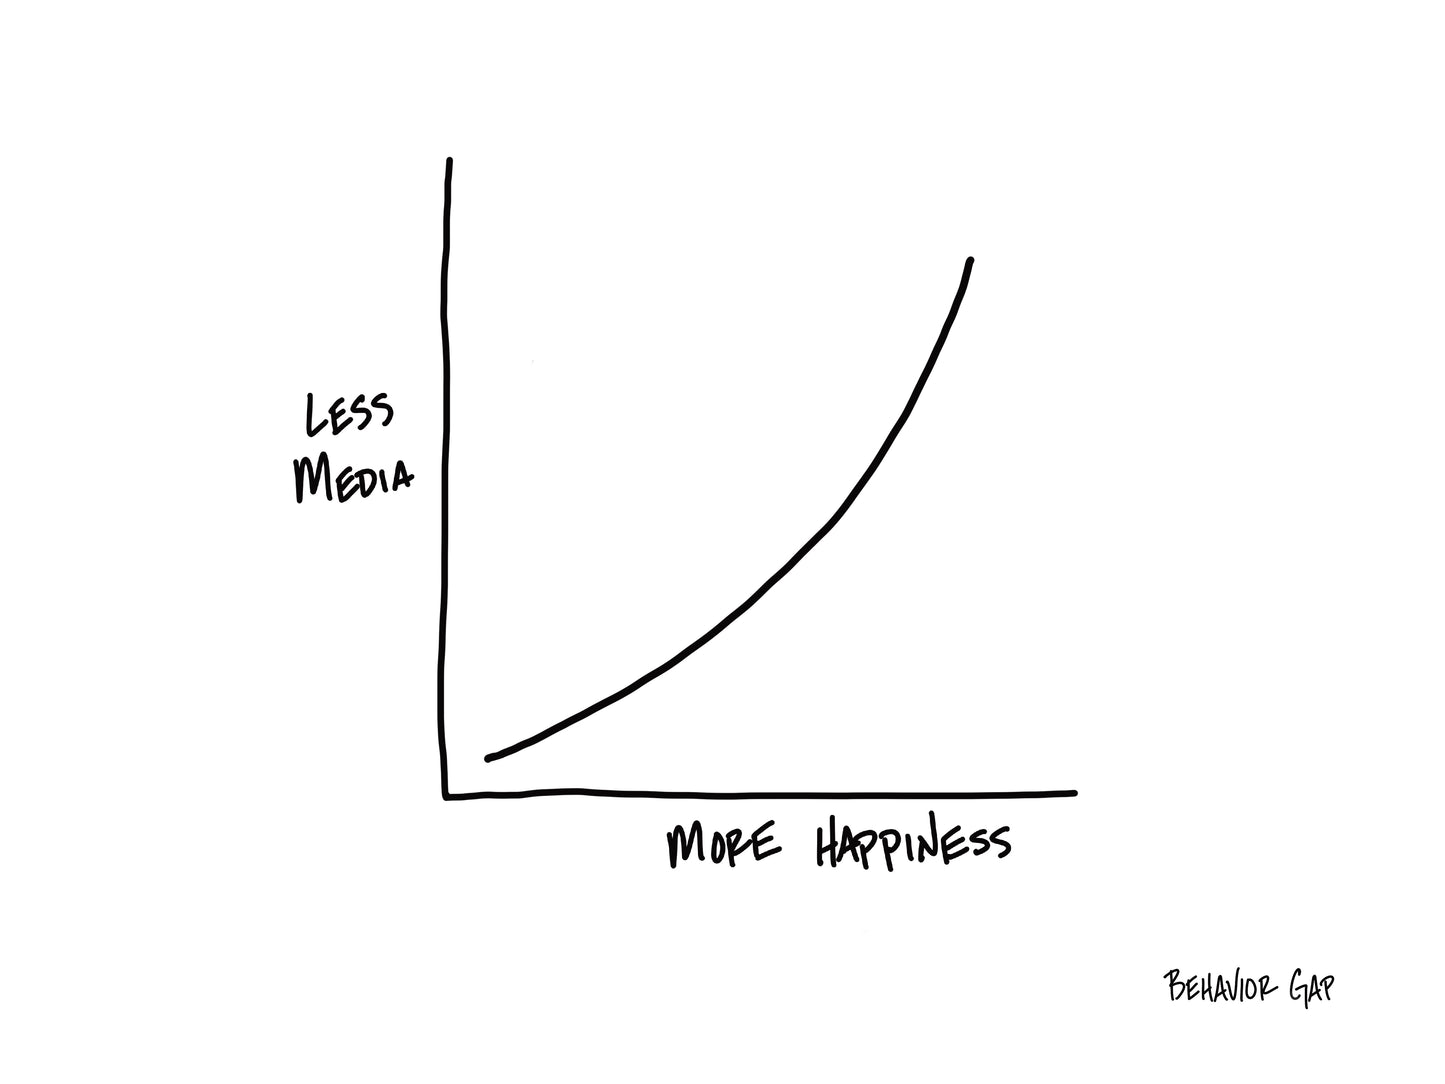 Less Media More Happiness